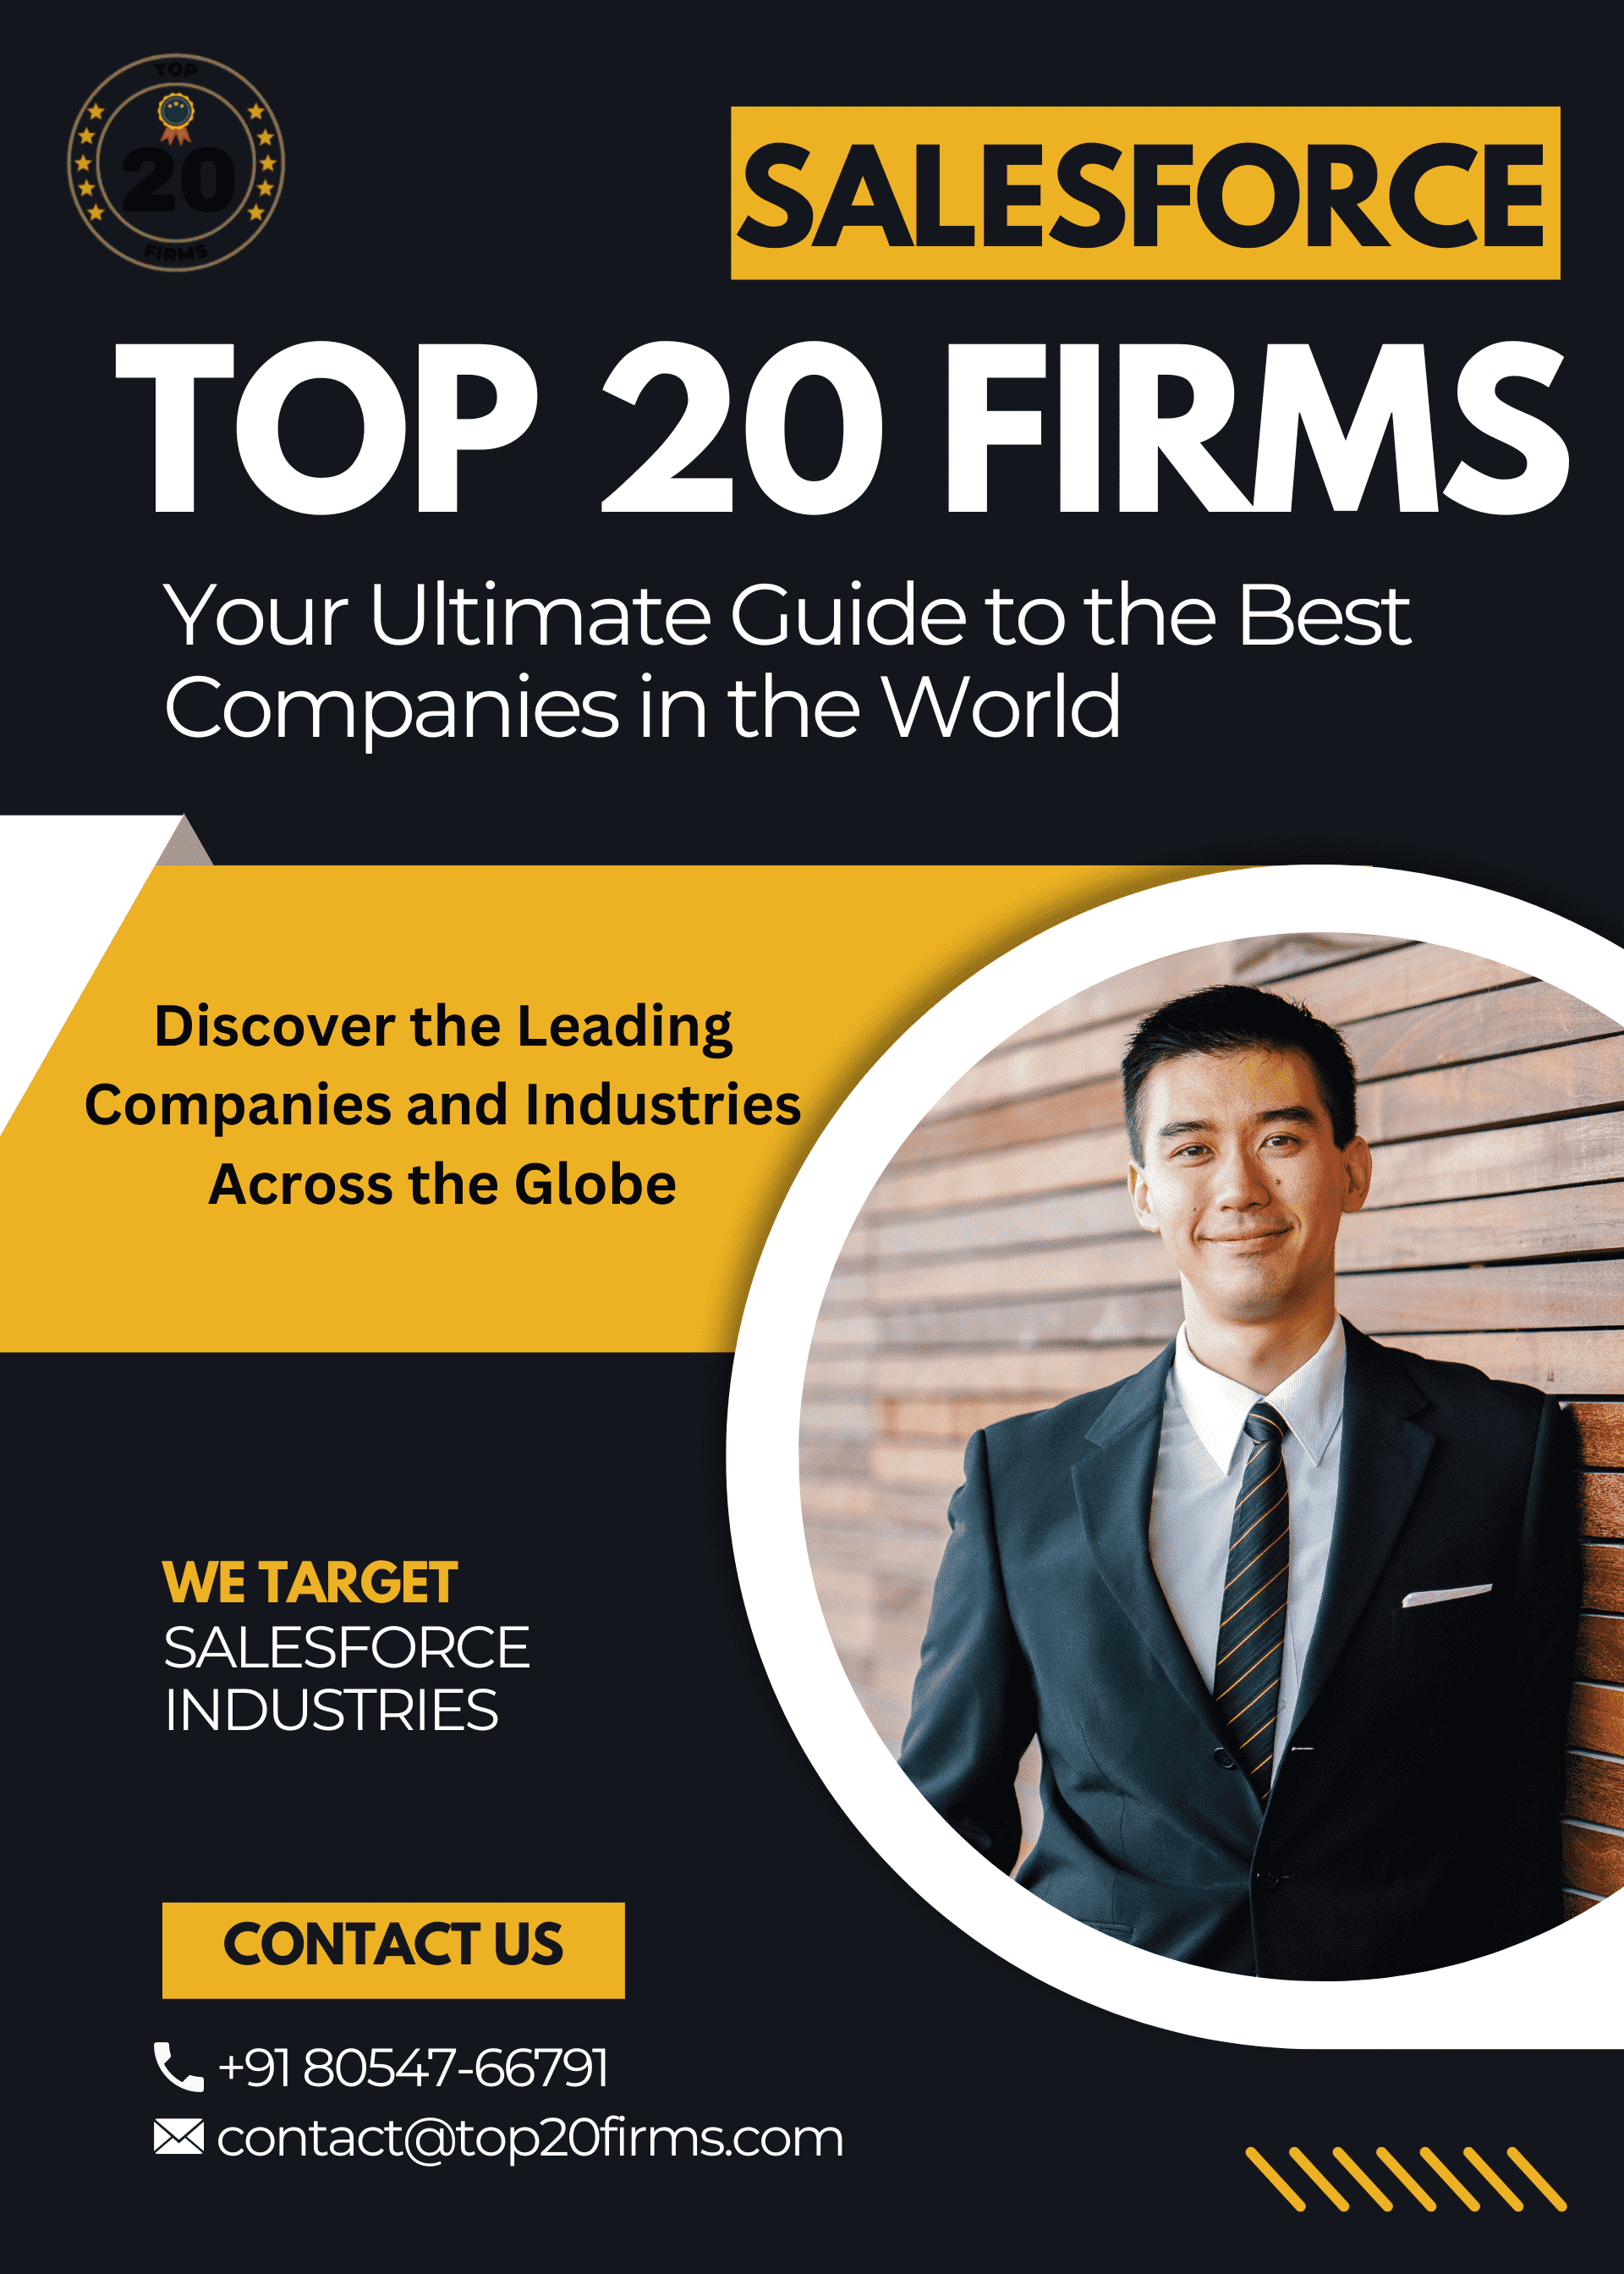 Top 20 Firms - Ottawa Professional Services